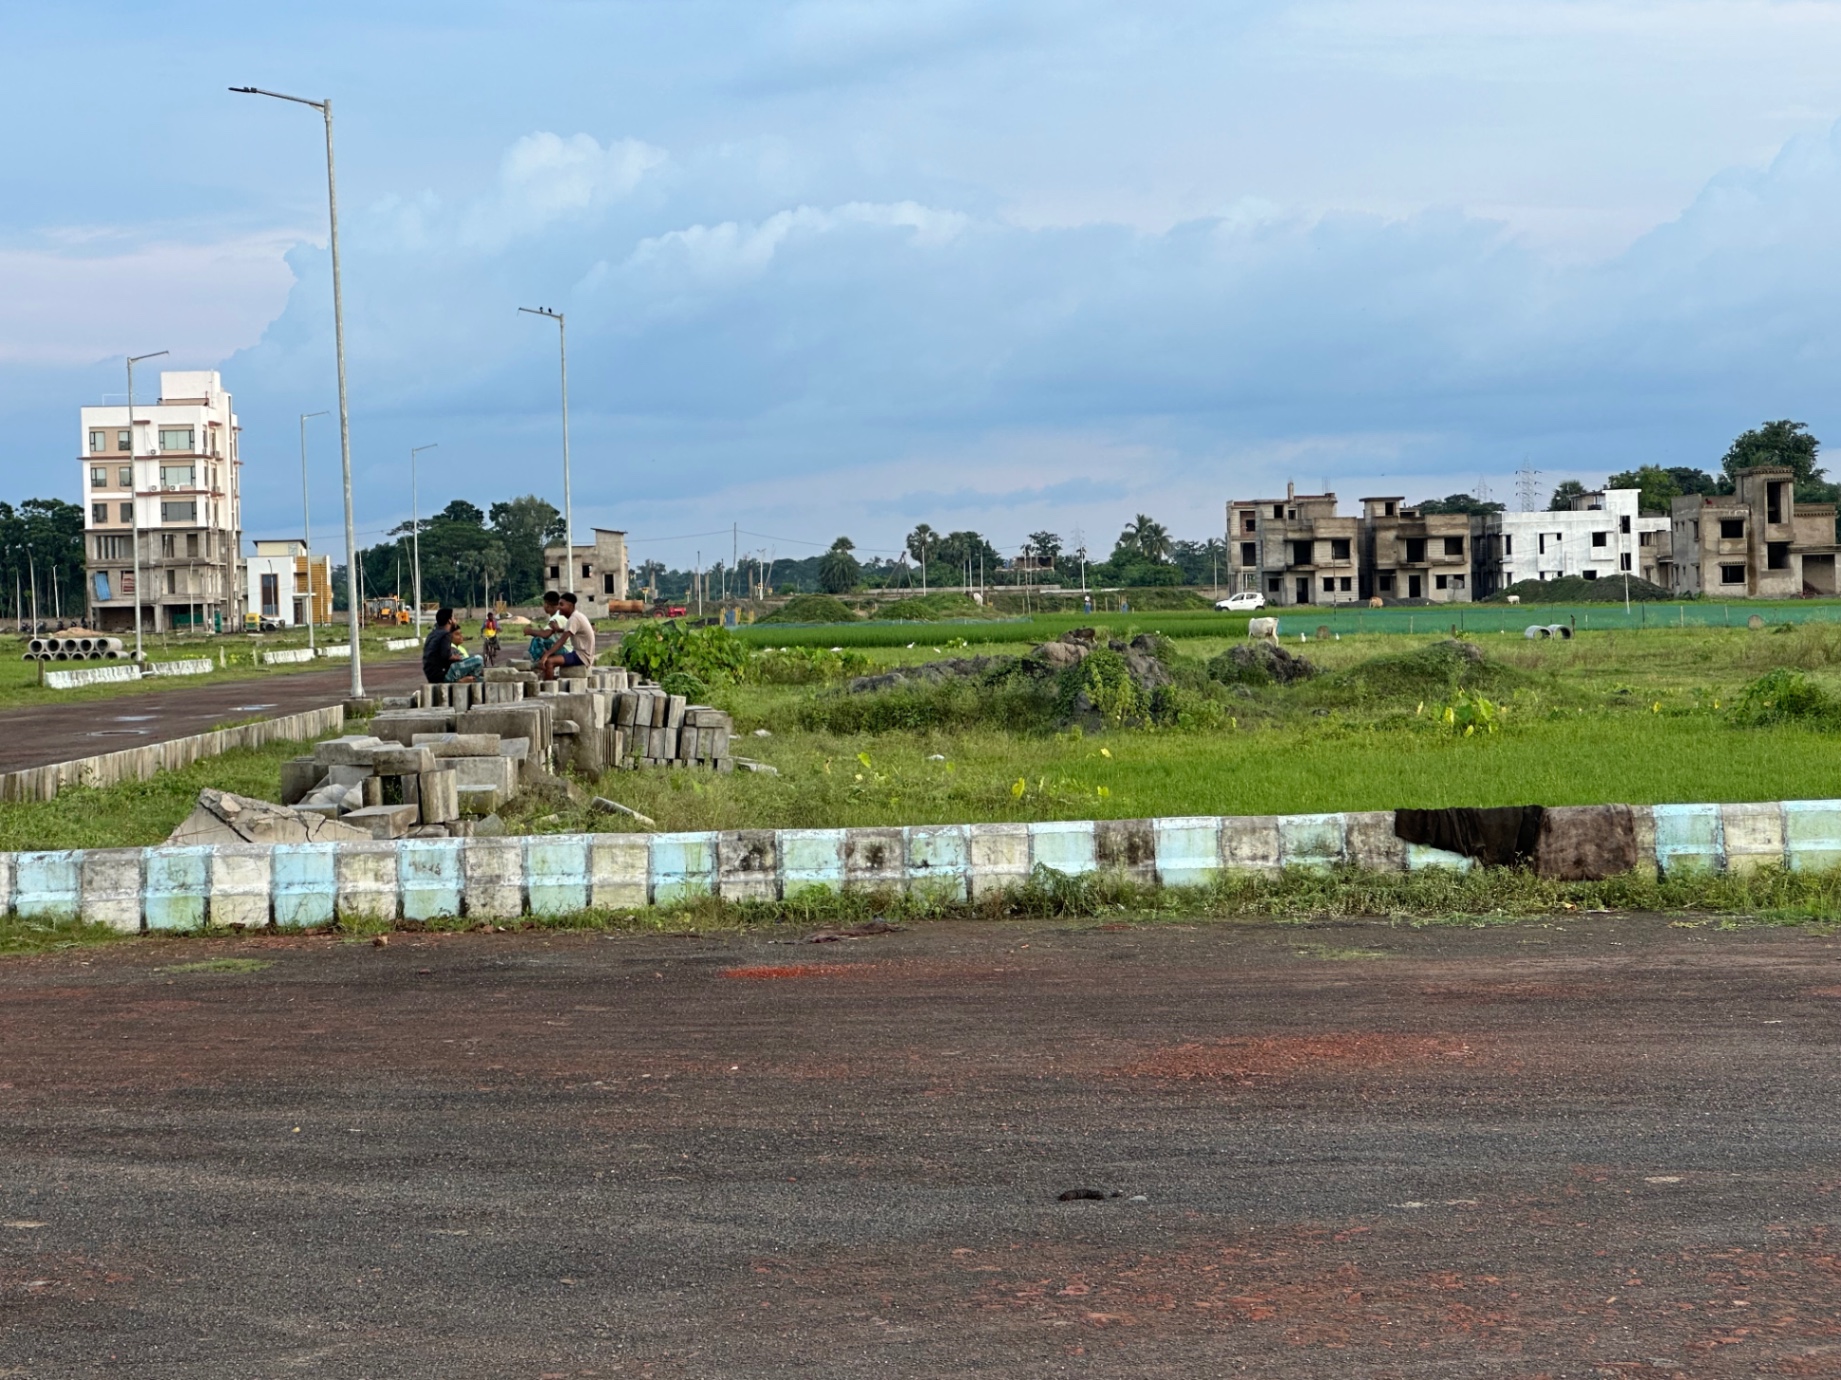 7,20,000 sq. ft. Sell Land/ Plot for sale @Rajarhat, newtownaction area 3 